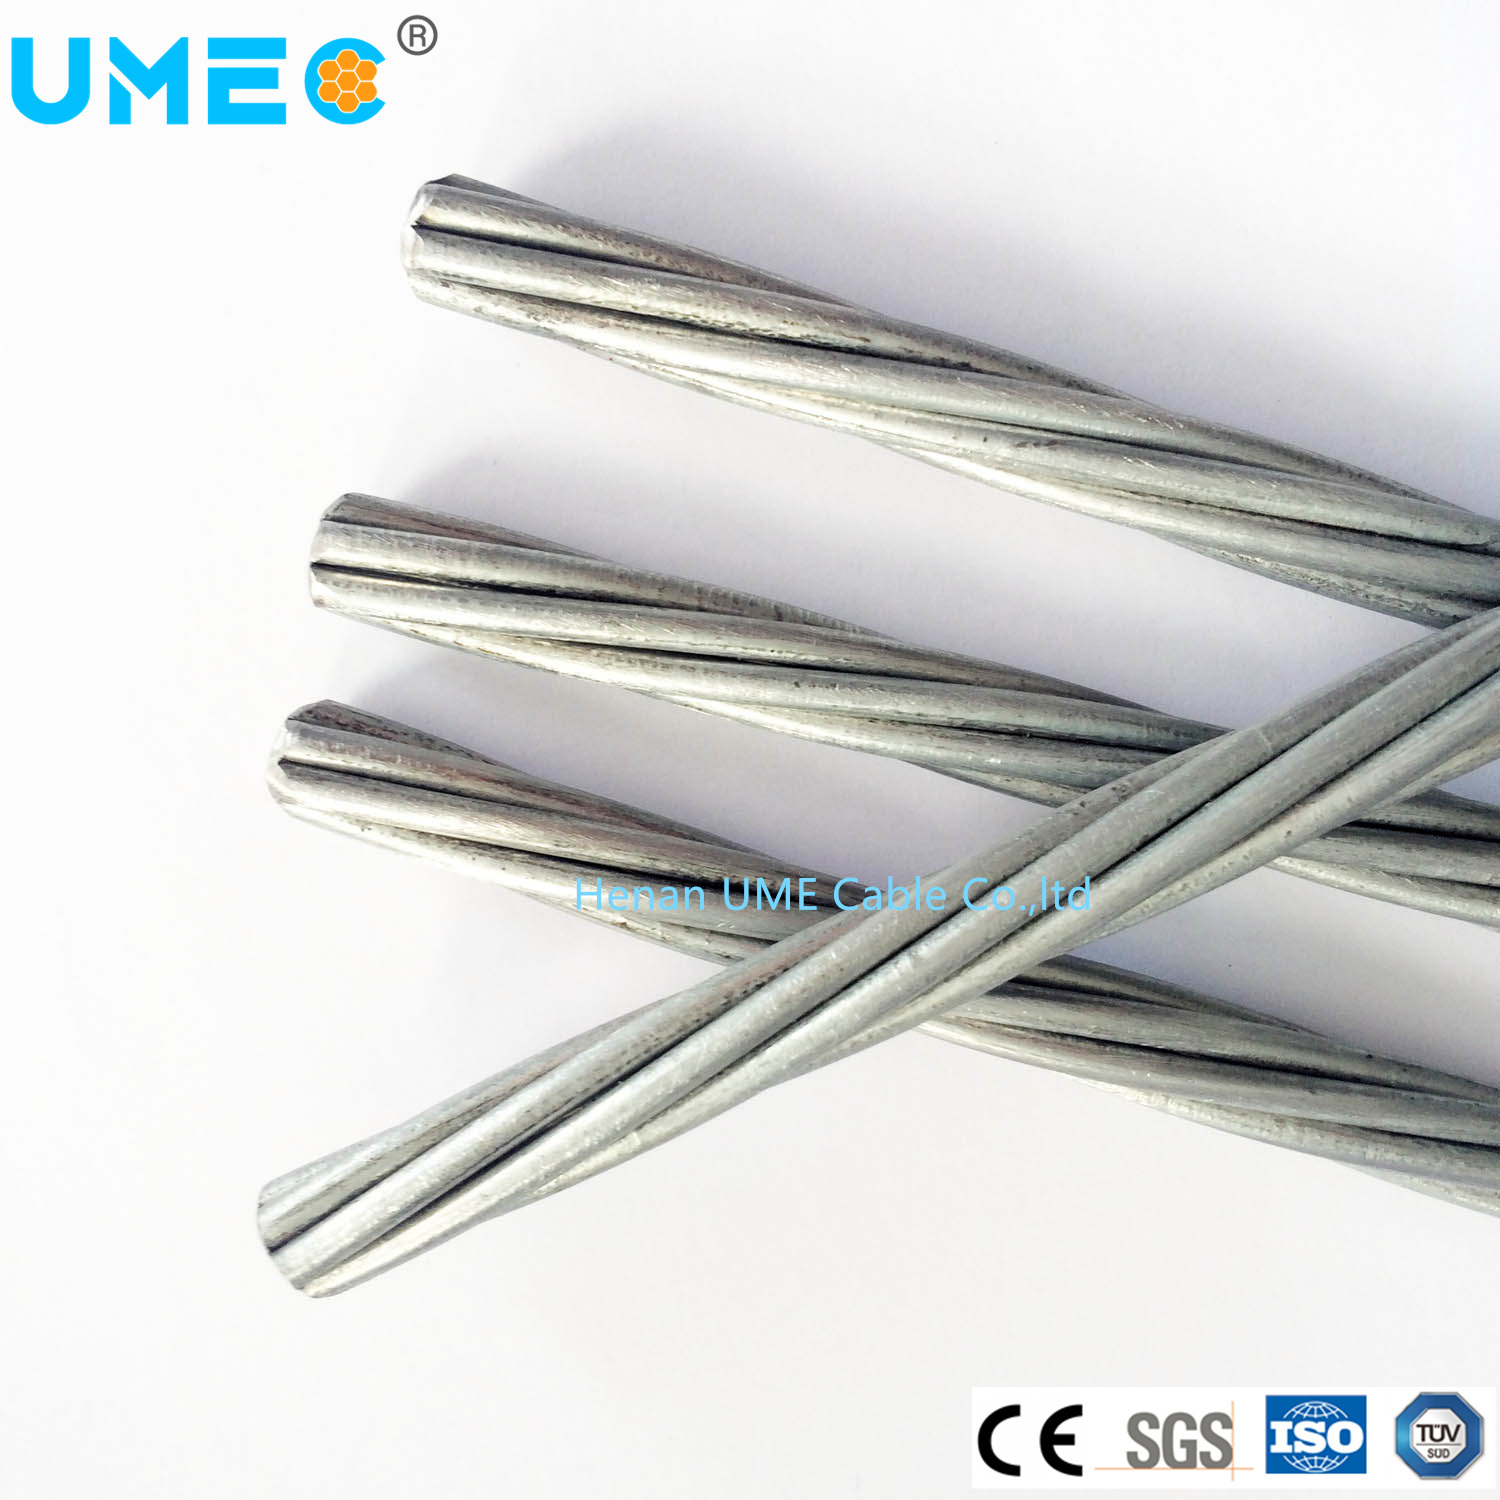 ASTM a-363 Zinc-Coated (Galvanized) Steel Overhead Ground Wire Strand